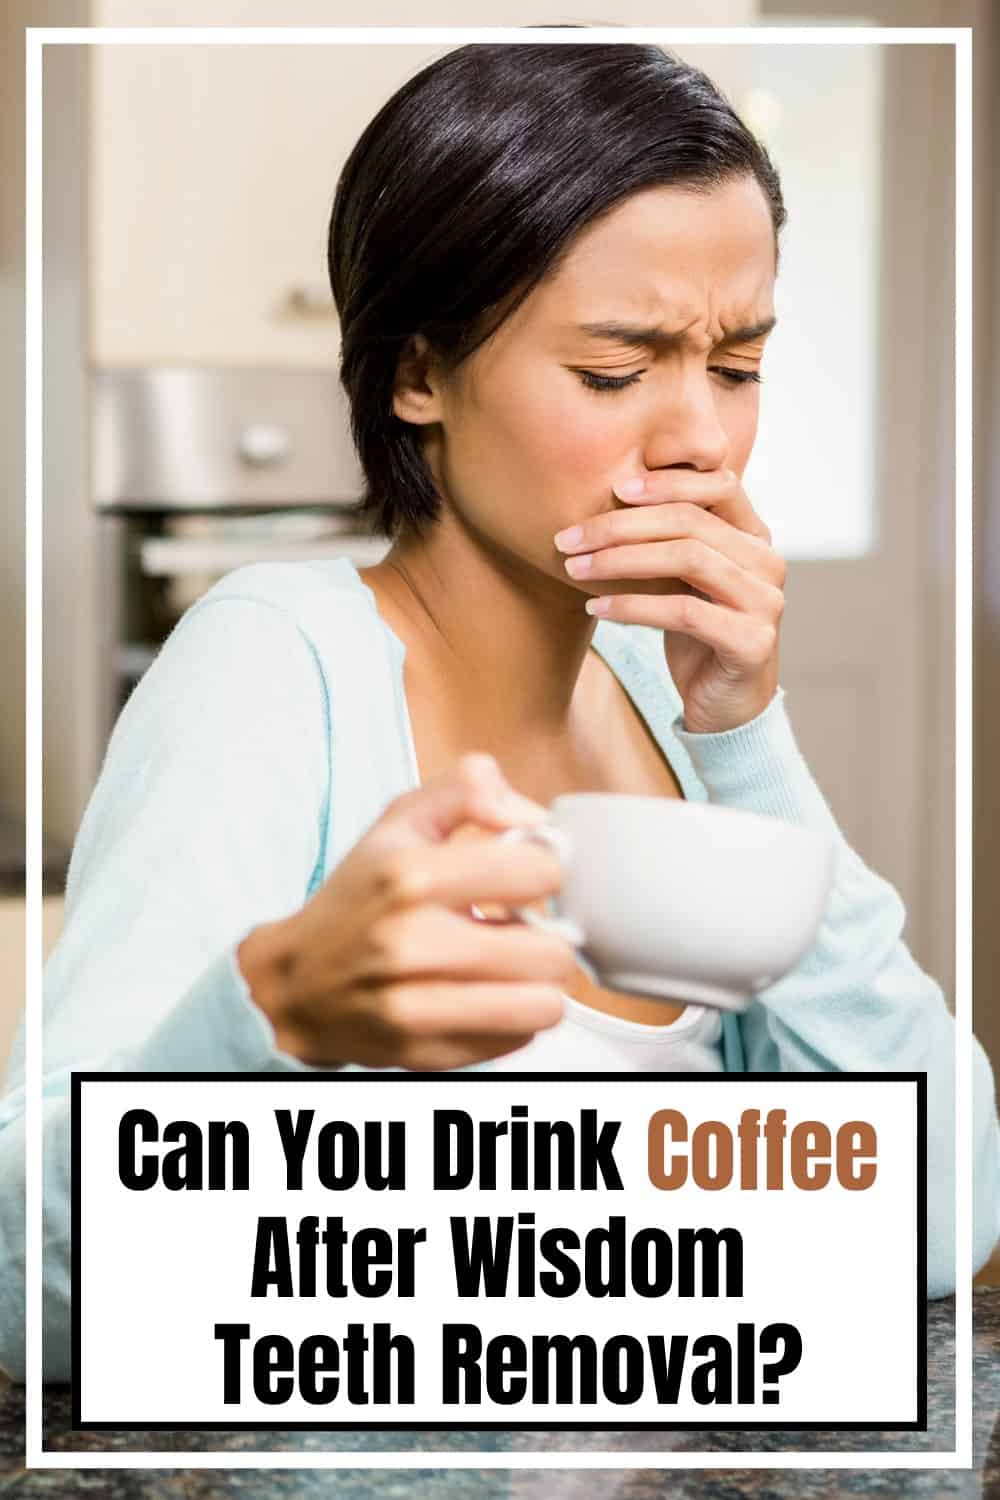 You can safely drink coffee after a wisdom tooth removal